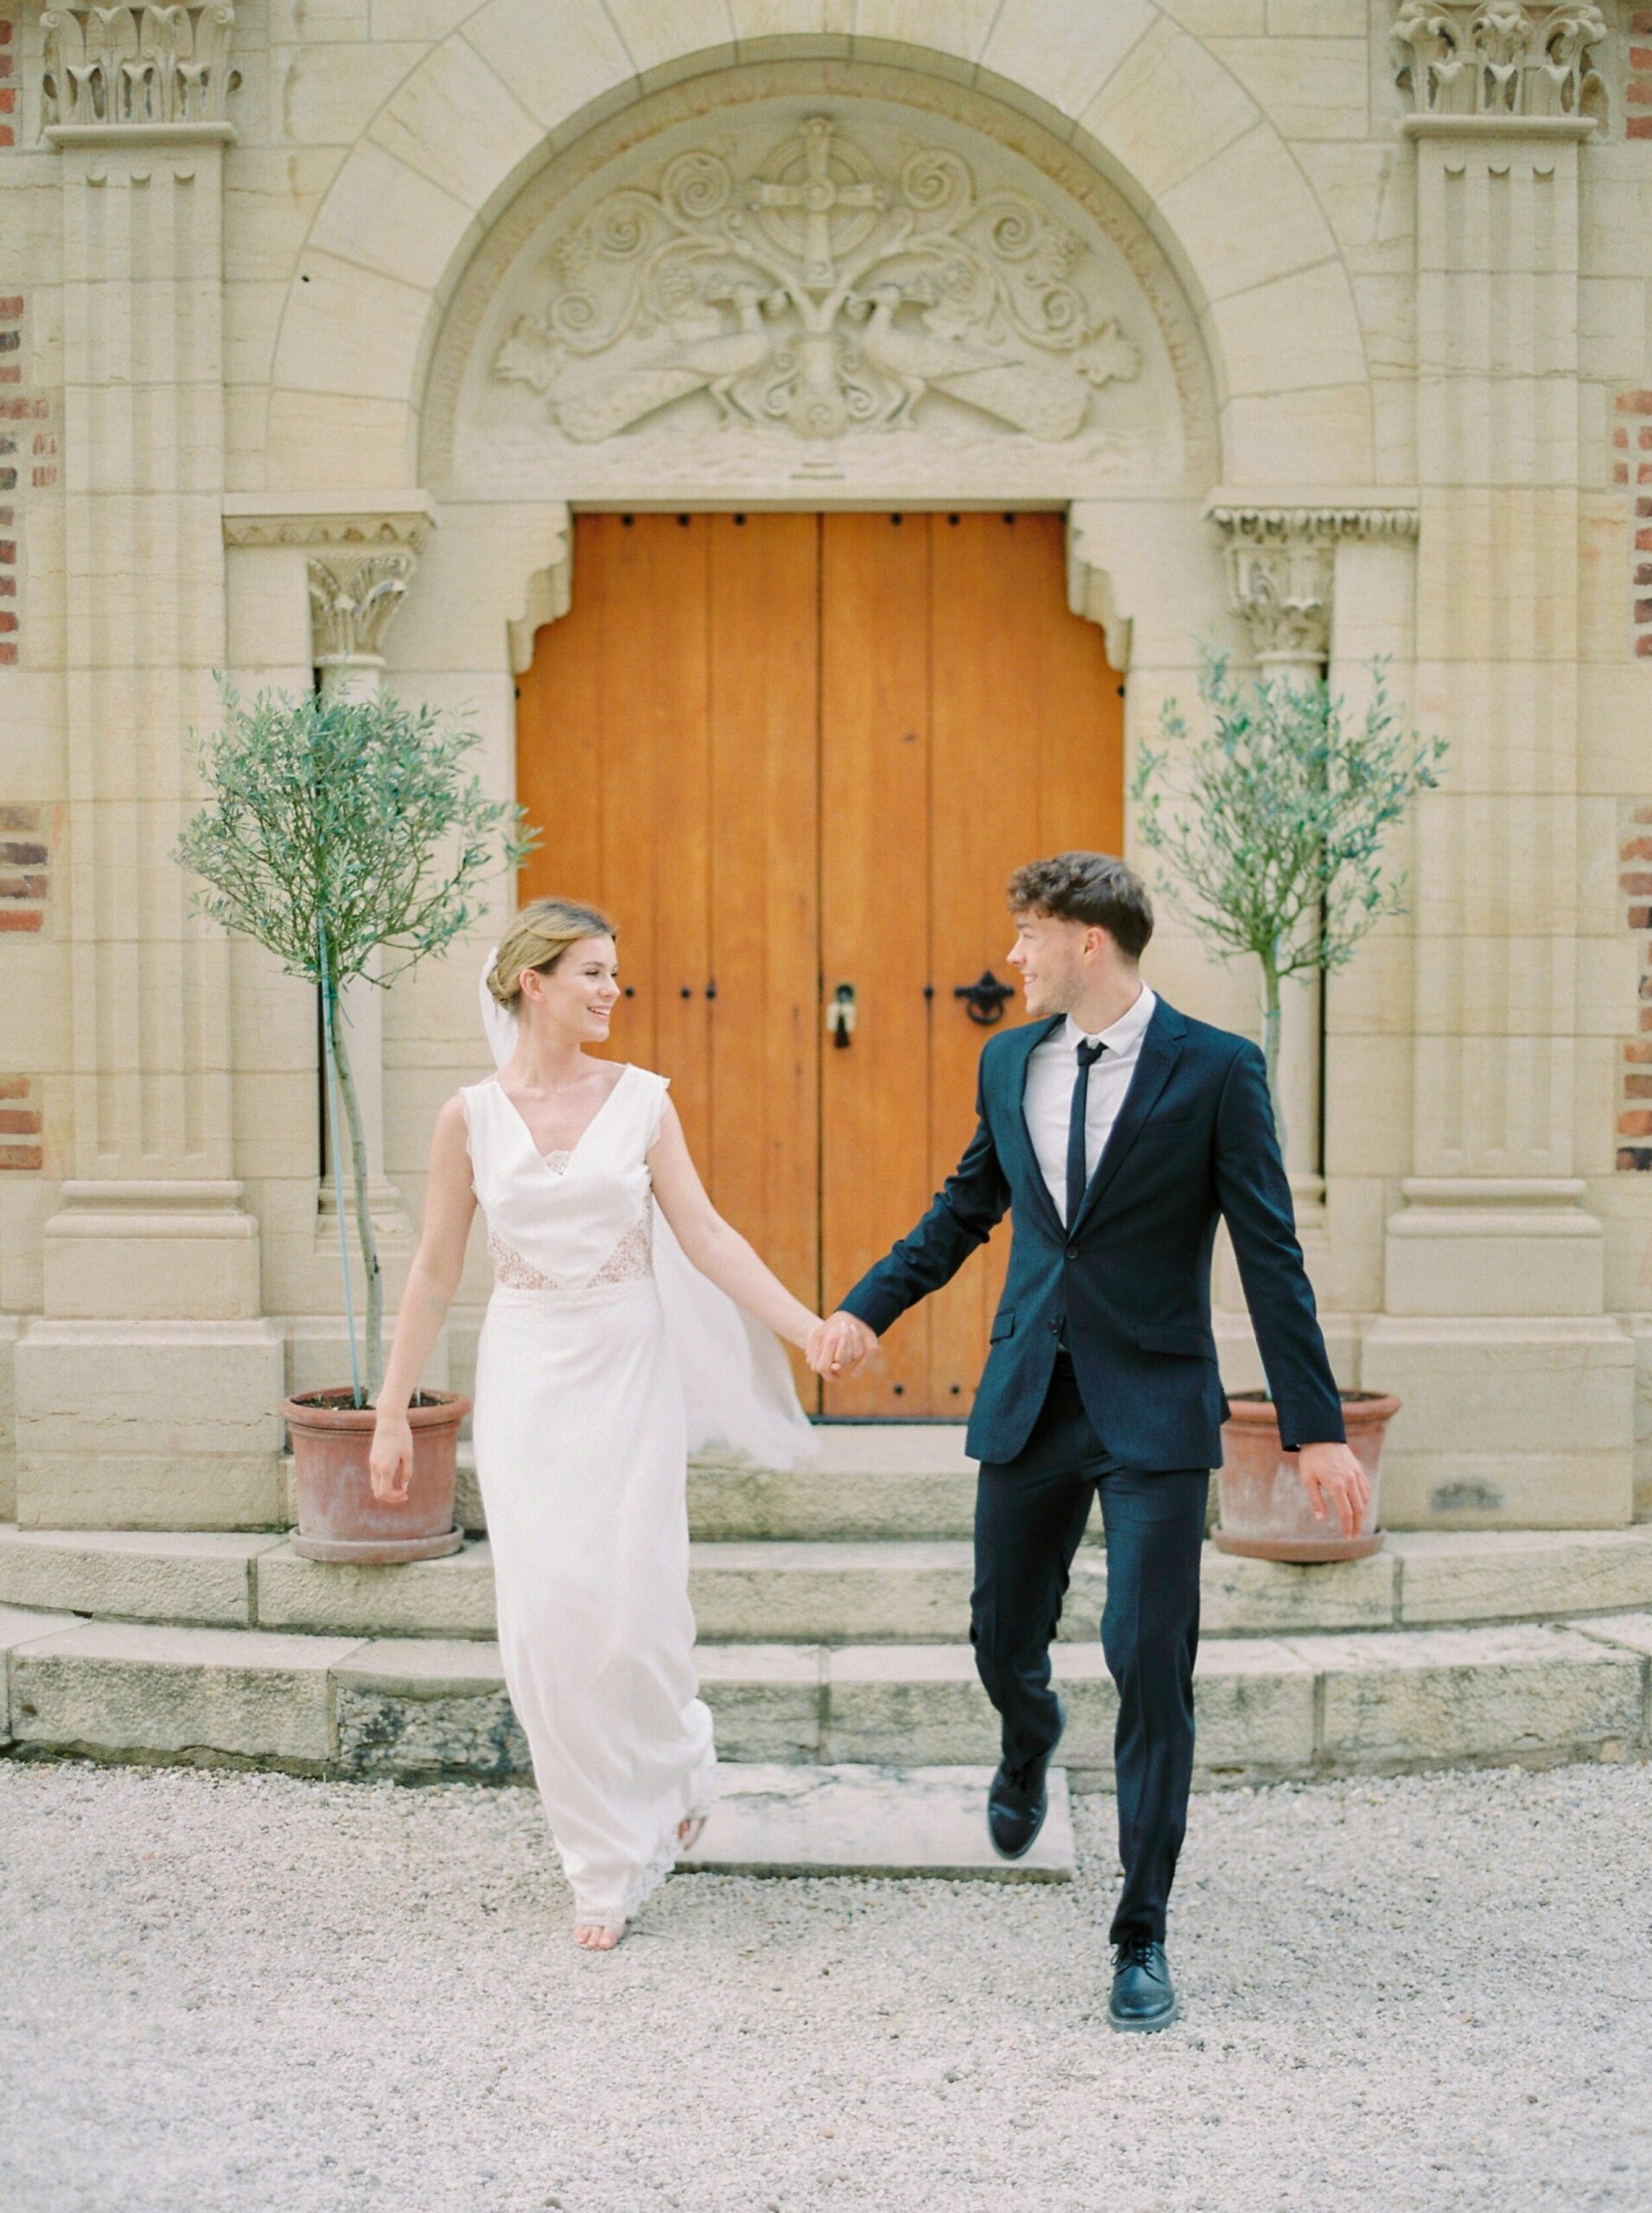  French chapel with bride and groom Chateau wedding | Paris wedding photographer | fine art film photographer 